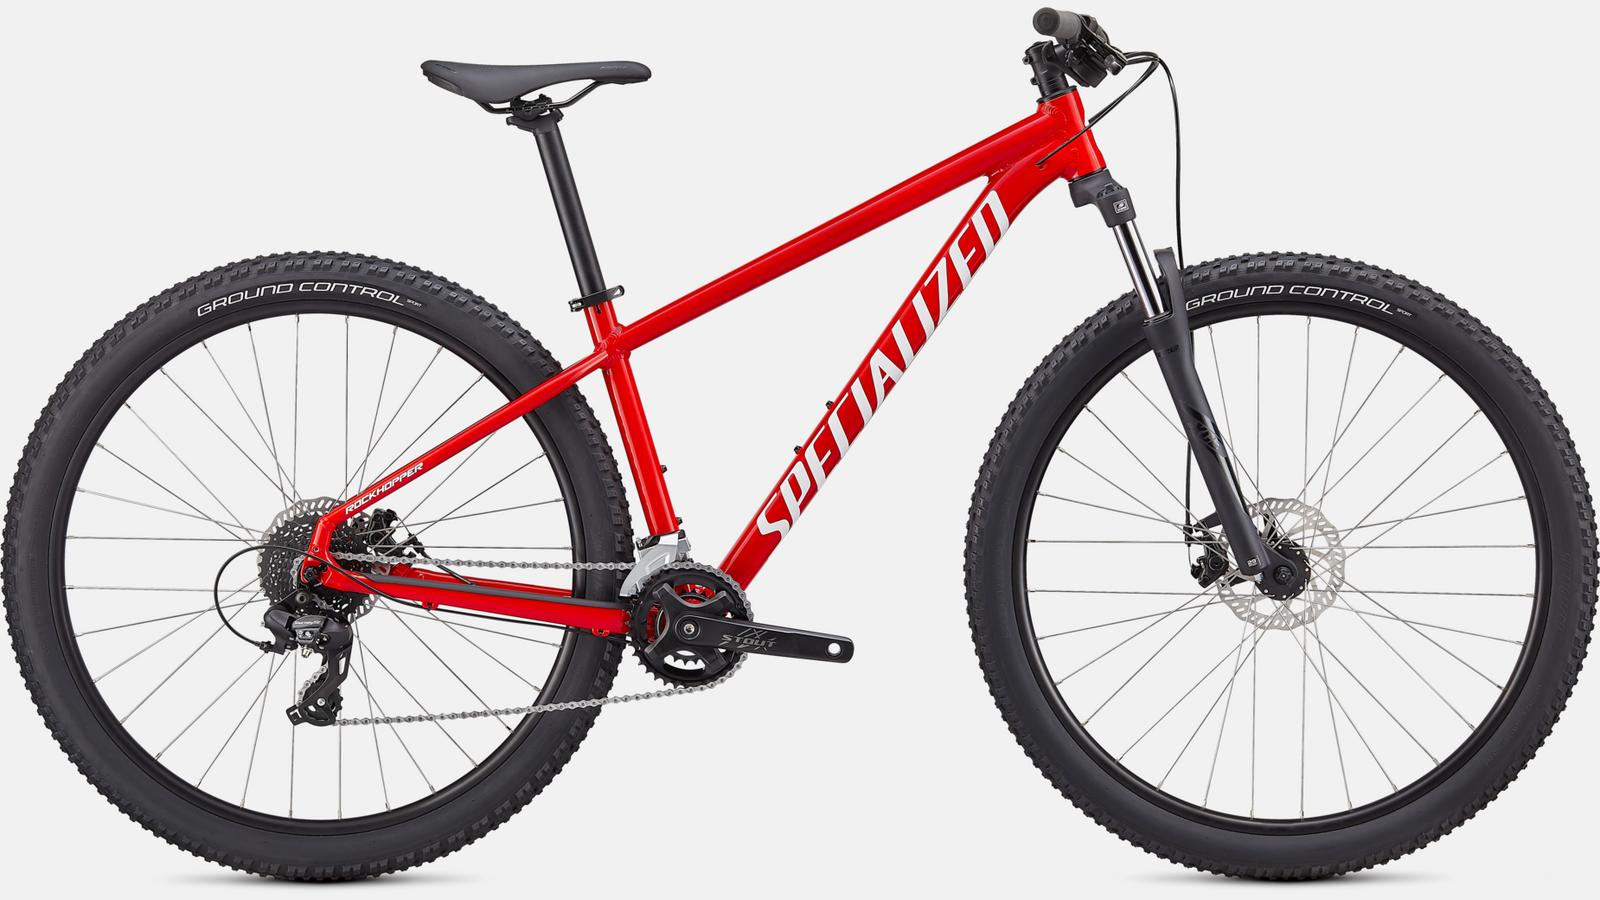 Paint for 2021 Specialized Rockhopper 26 - Gloss Flo Red